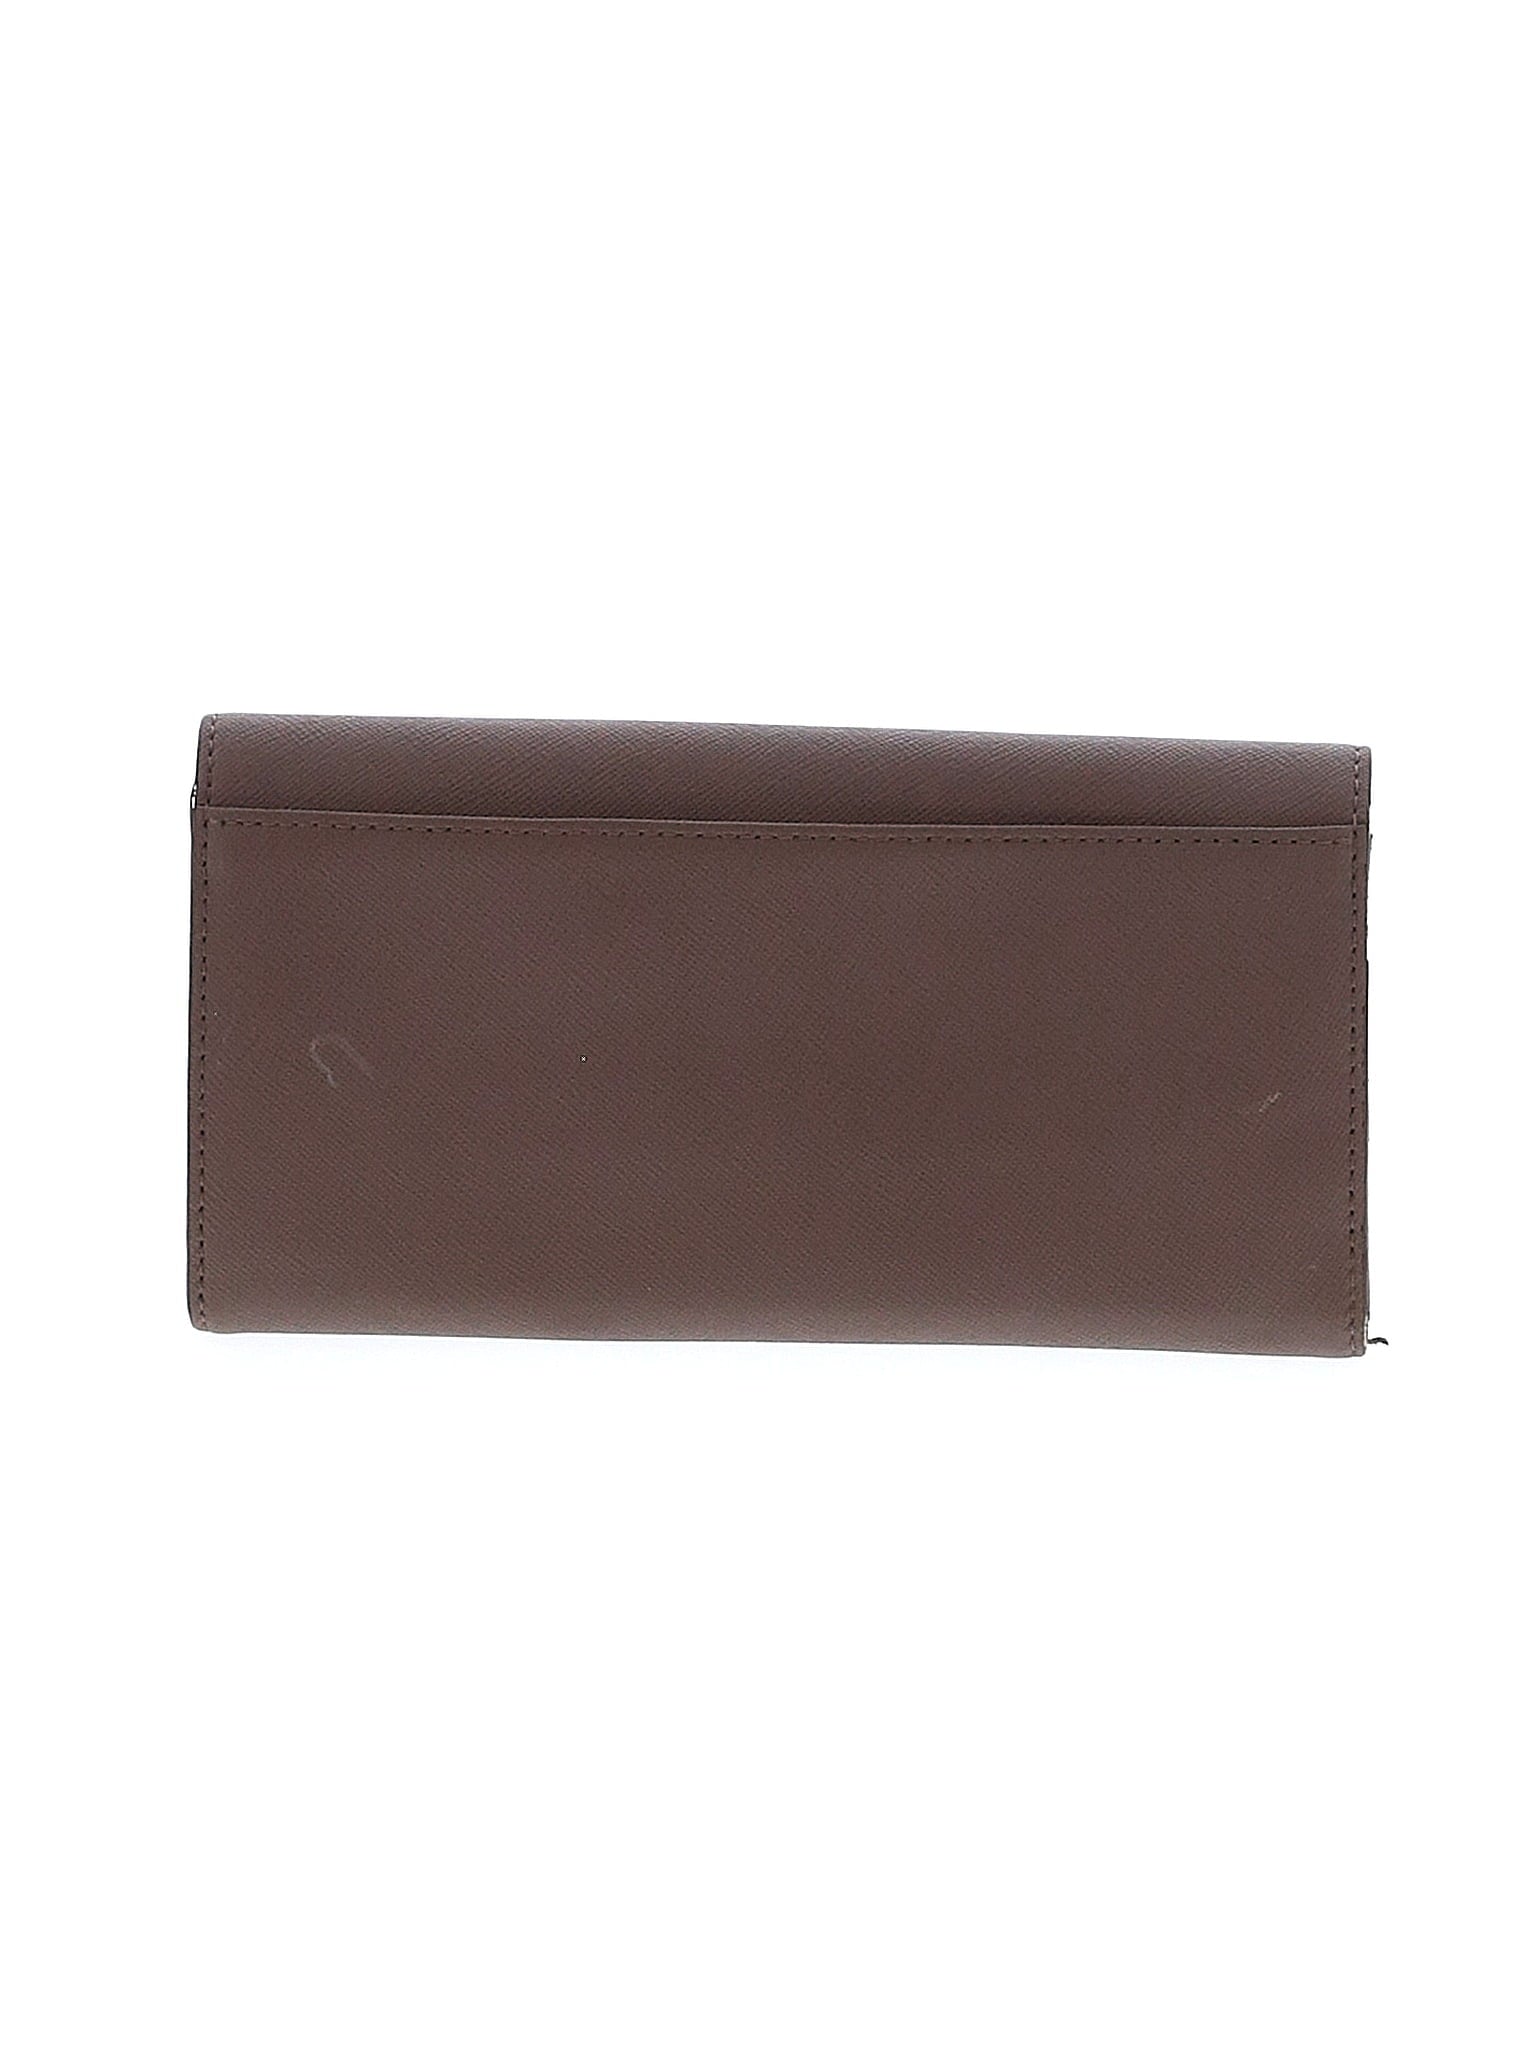 Leather Wallet size - One Size